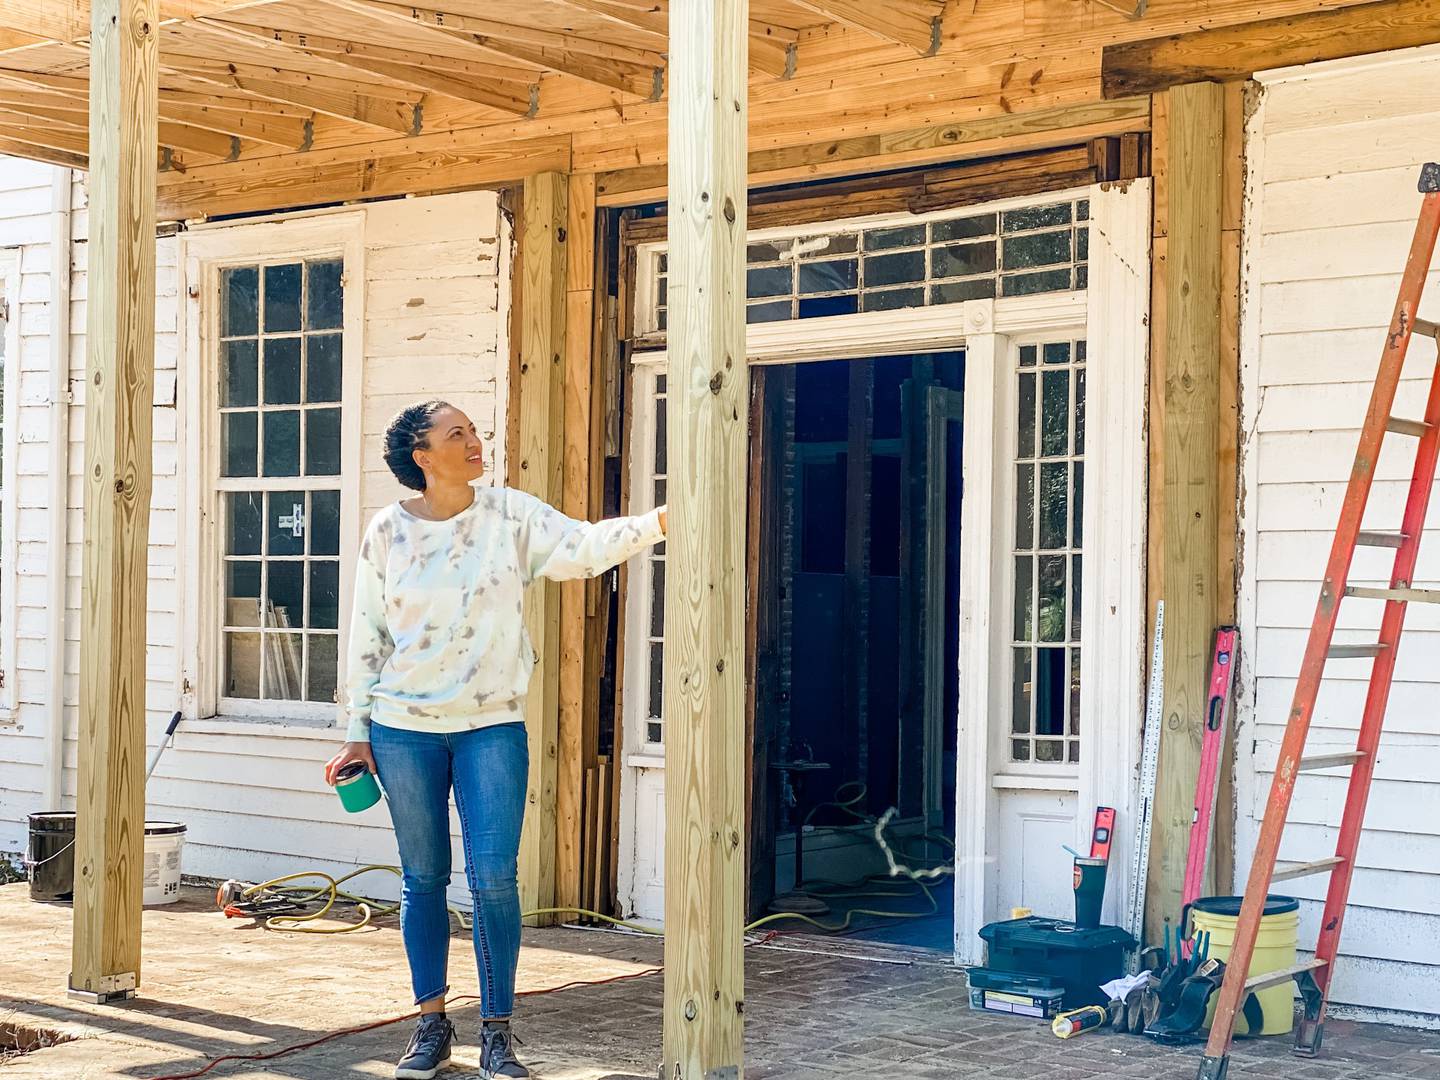 This midwife is building Alabama’s first freestanding birth center